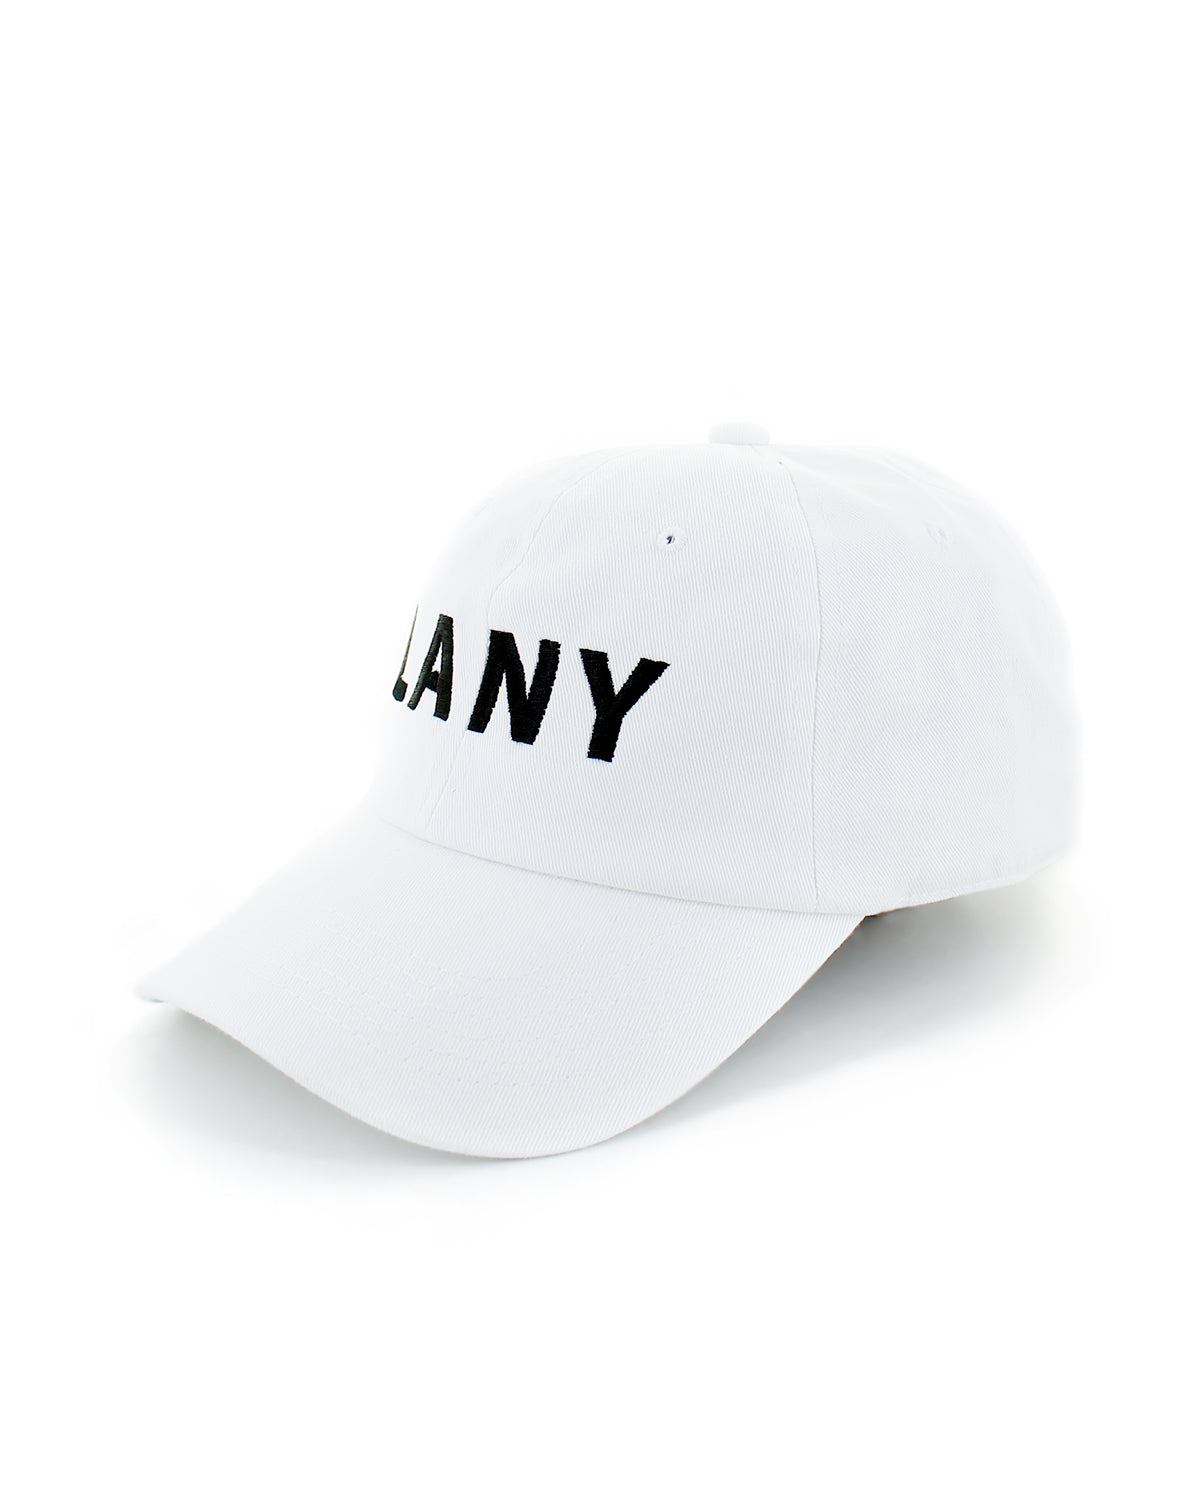 LANY Bold Embroidered Cap - LANY